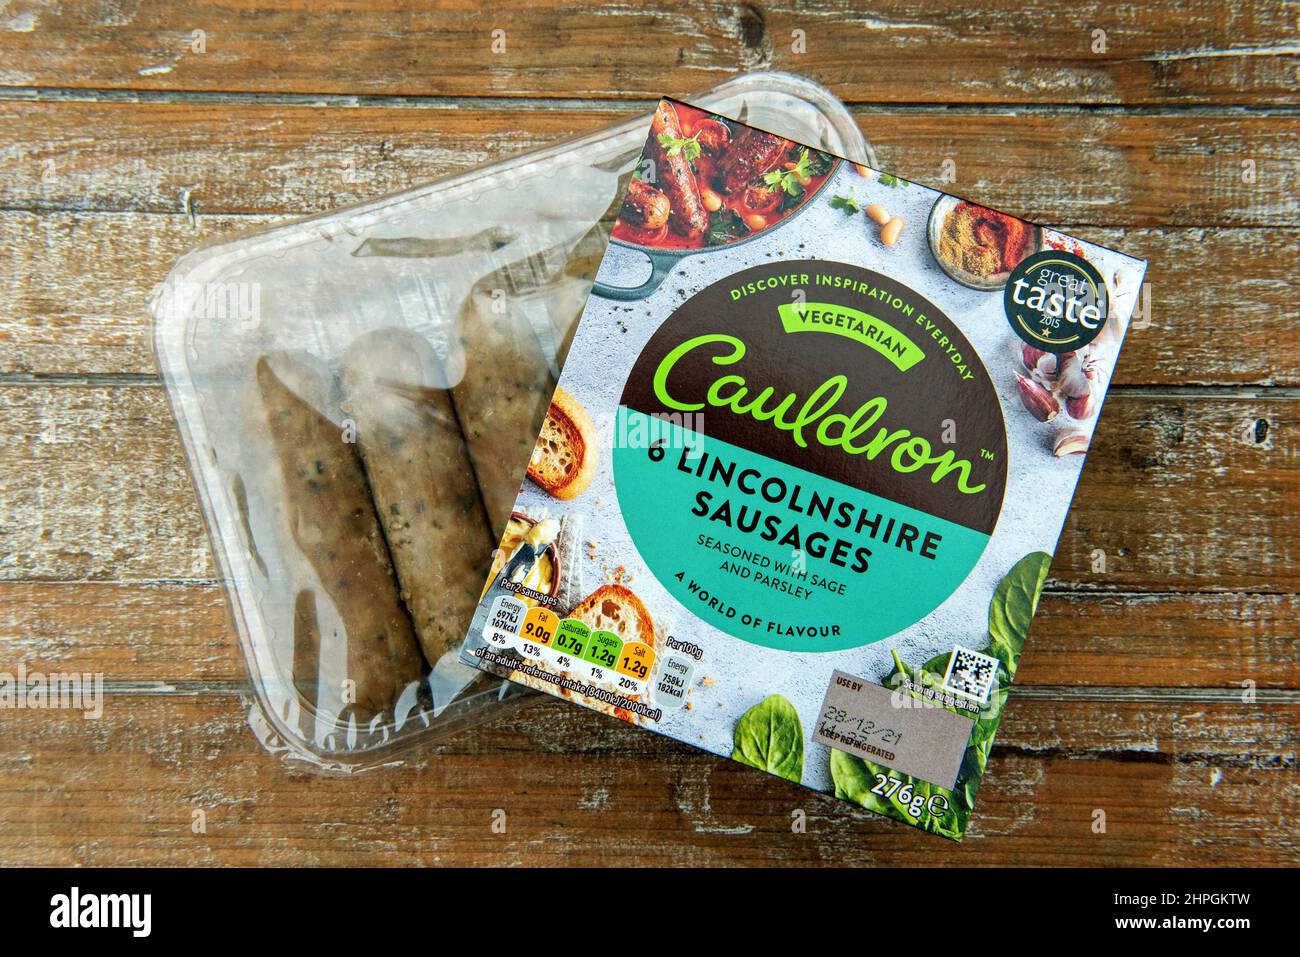 Packet of Cauldron vegetarian Lincolnshire sausages on wooden background Stock Photo